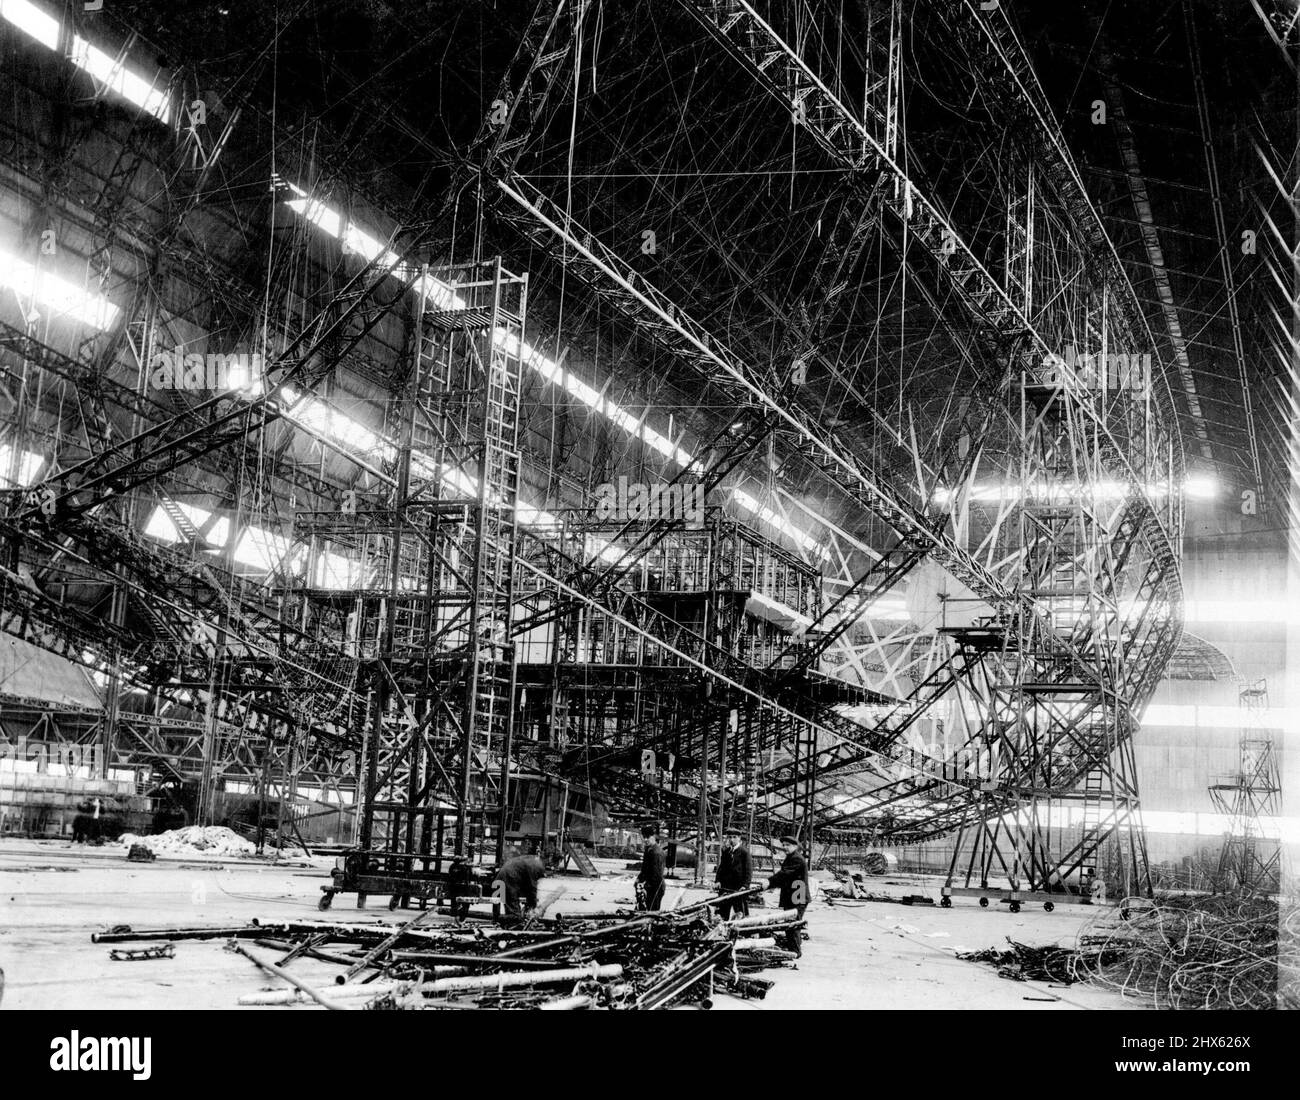 Dismentling the giant framework of the R 100 in the shed at Cardignton. Last Of The R 100 Giant Airship Dismantled At Cardington -- The work of dismantling the airship R 100 is now being carried out at Cardington. The metal will be mad into souvenirs. January 1, 1931.;Dismentling the giant framework of the R 100 in the shed at Cardignton. Last Of The R 100 Giant Airship Dismantled At Cardington -- The work of dismantling the airship R 100 is now being carried out at Cardington. The metal will be Stock Photo